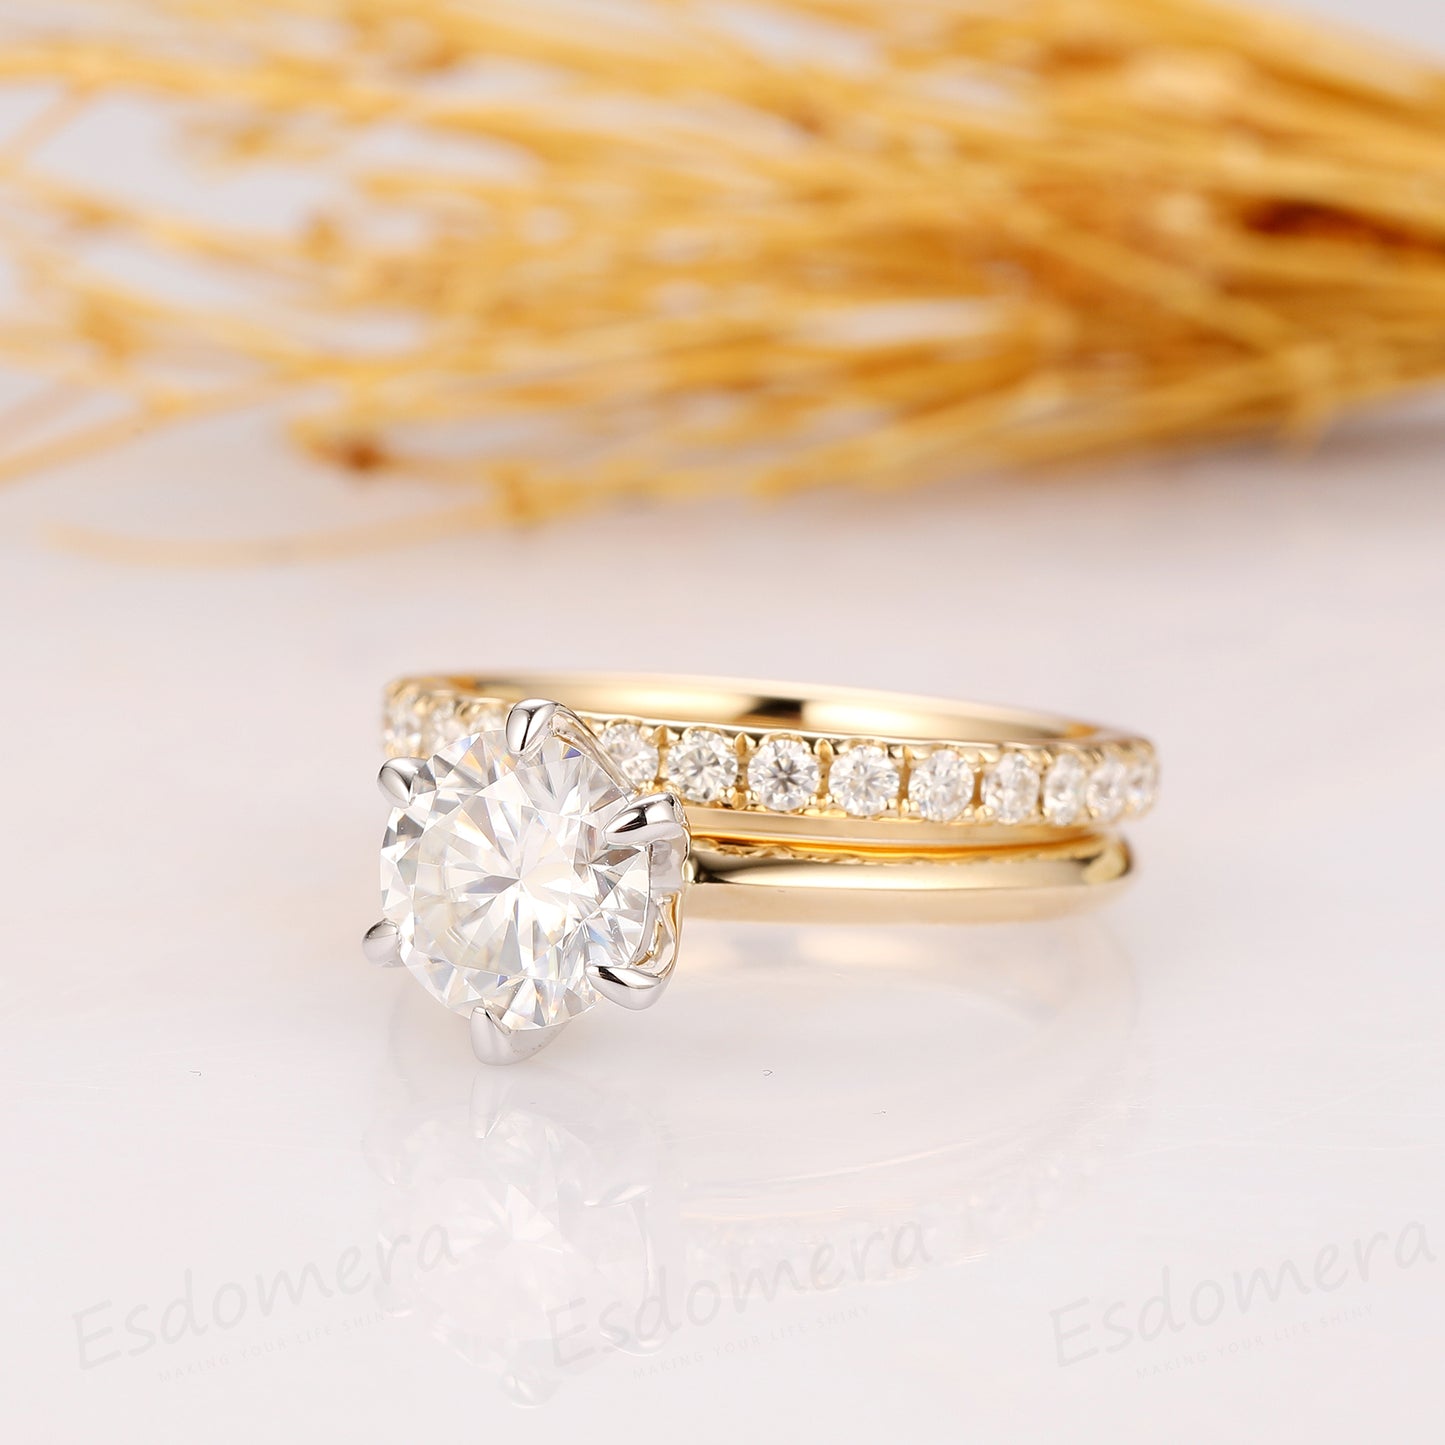 2CT Round Cut Moissanite Ring, Solitaire Engagement Ring, 14k Two Tone Gold Moissanite Ring